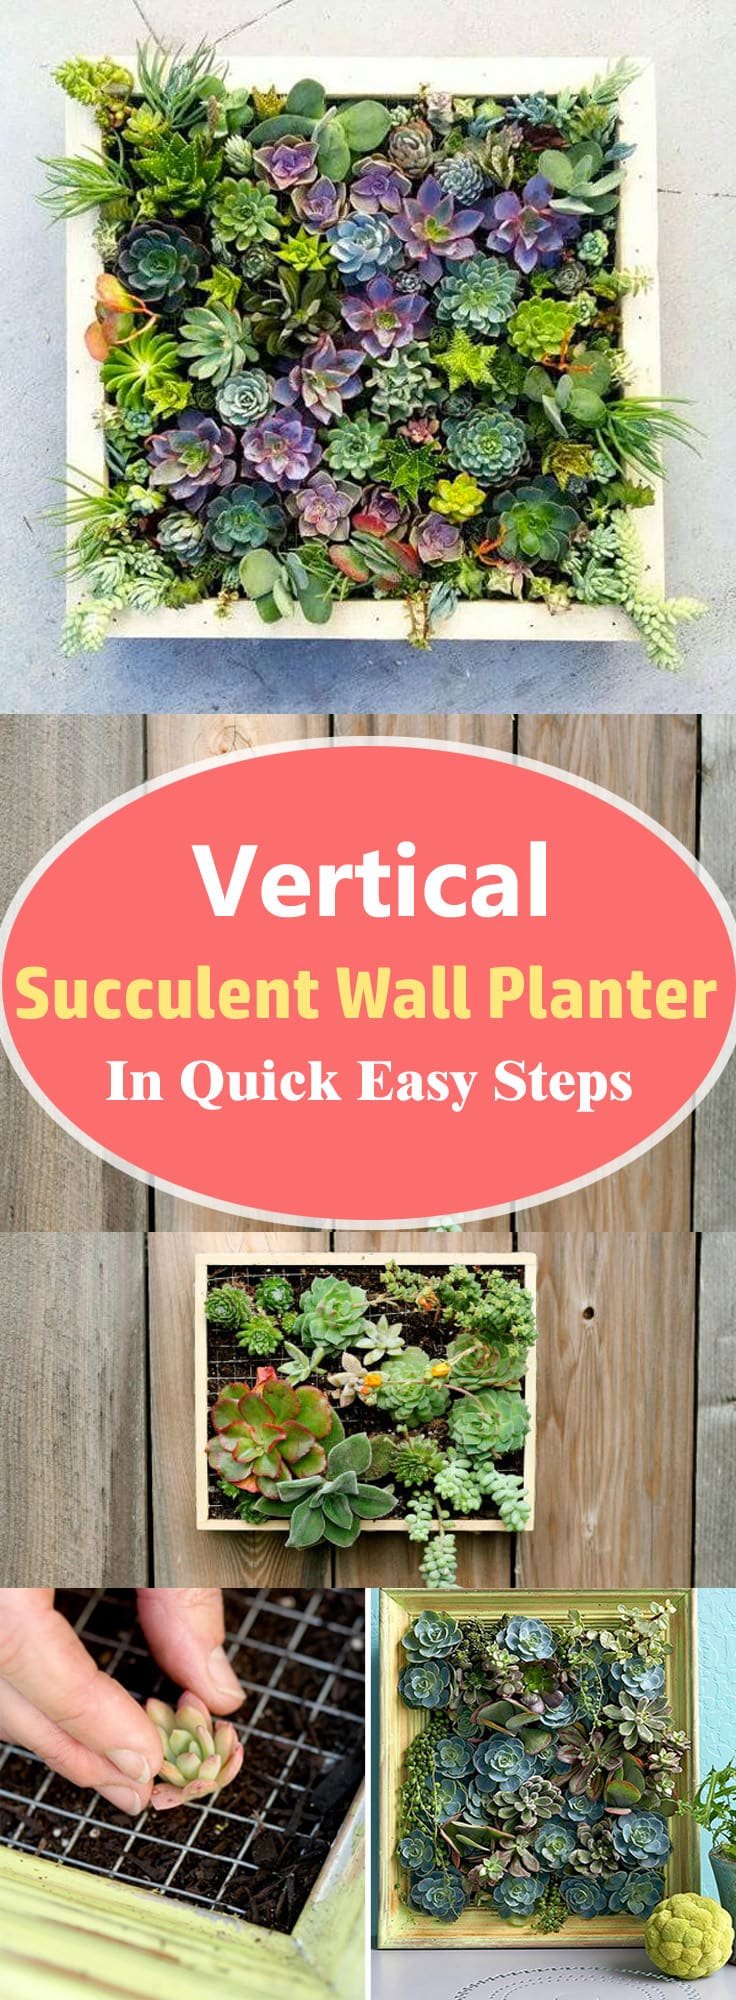 Learn how to make a vertical succulent wall planter in a few steps without spending money. You don't need to be a great DIYer to have this DIY succulent frame in your home.